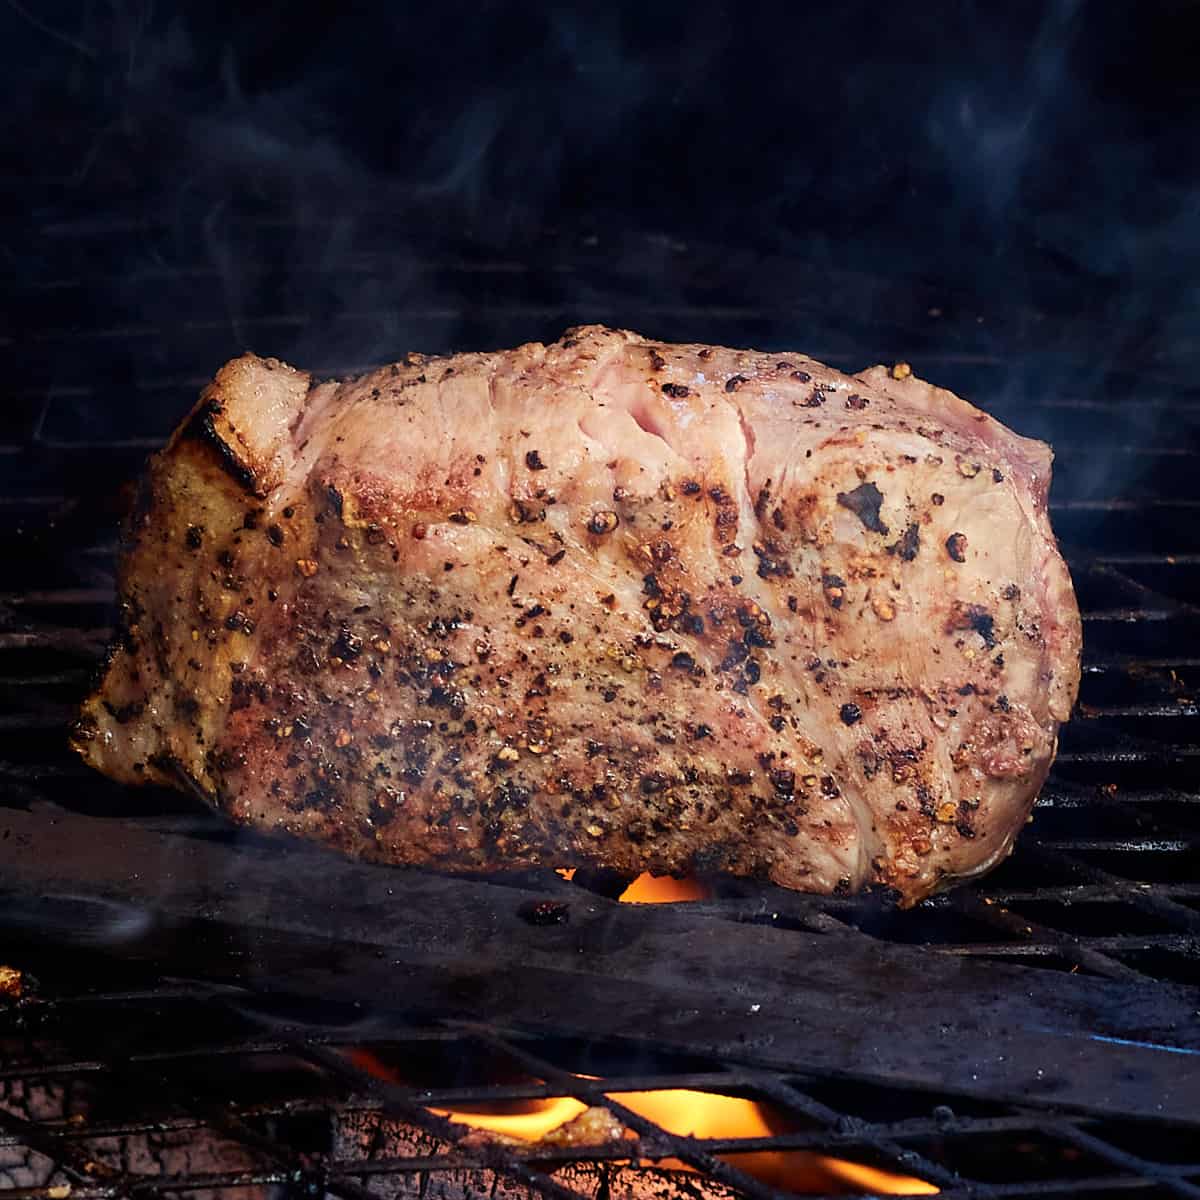 pork butt being grilled on a charcoal grill